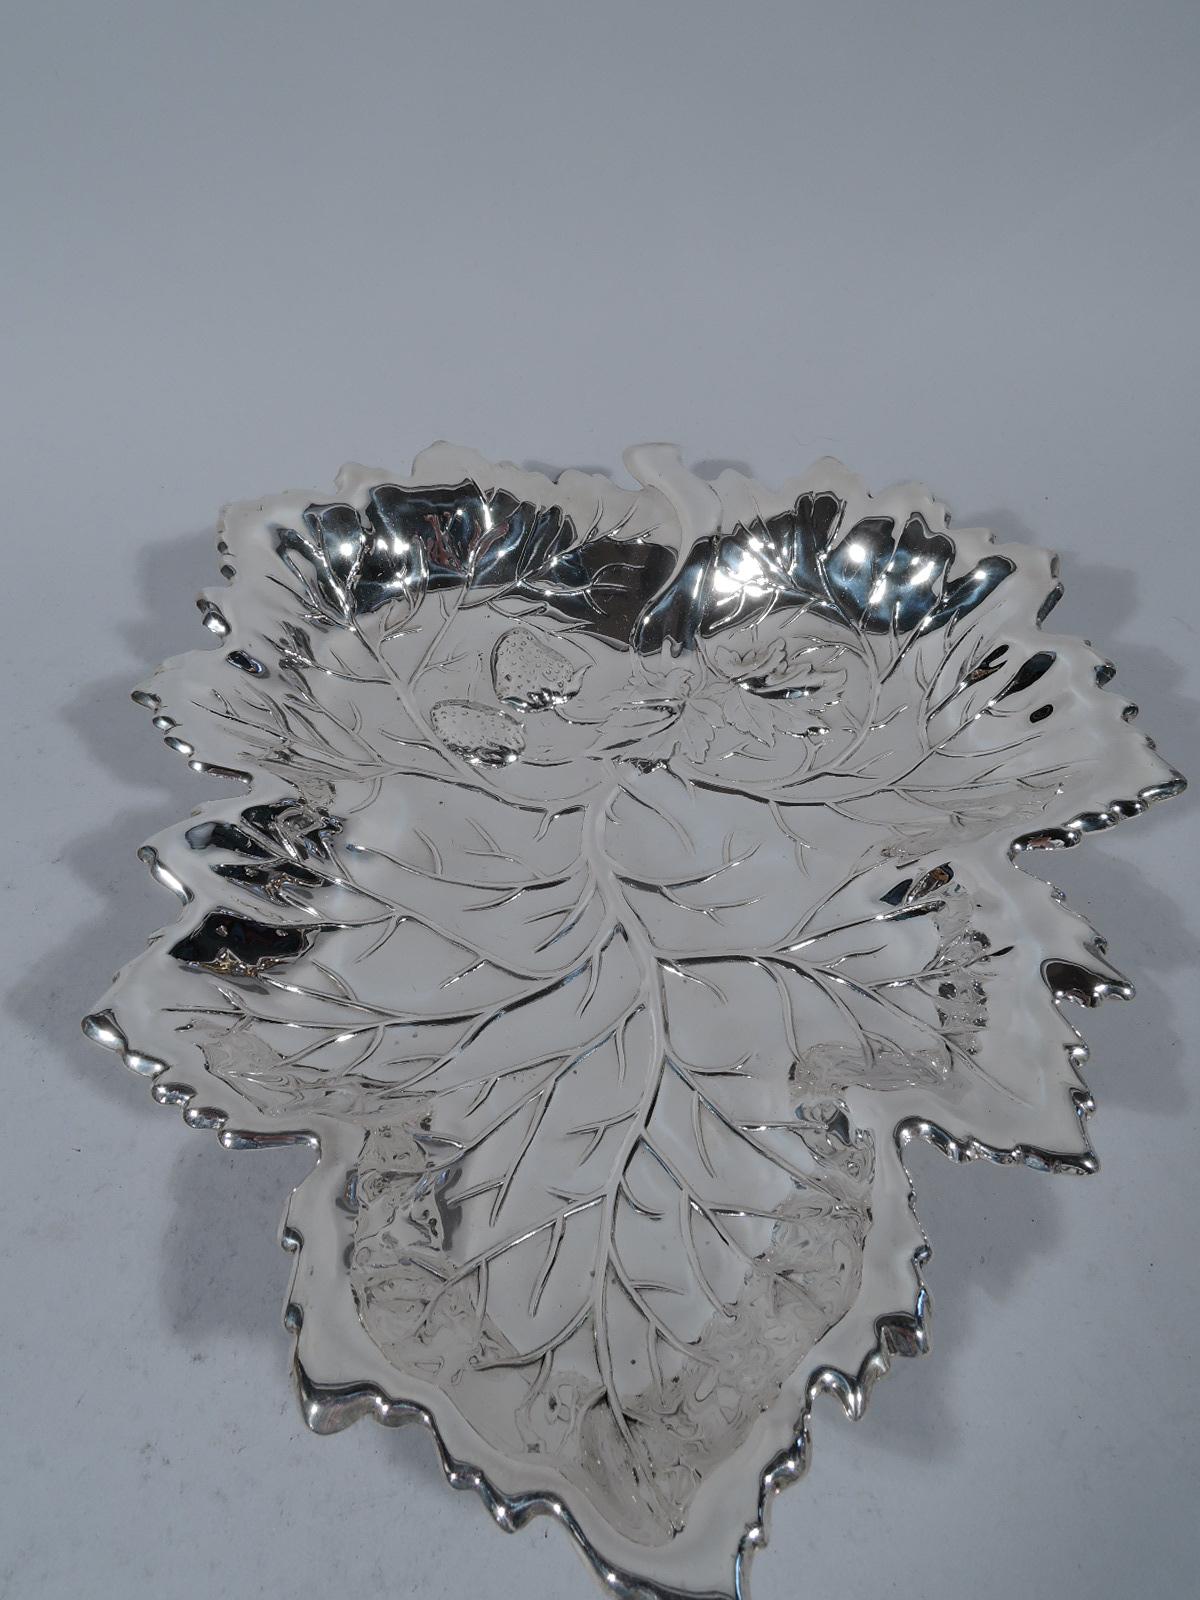 American sterling silver bowl, ca 1920. Leaf-form with spiky irregular tips and raised veins as well as a couple strawberries on leafing stems. Rests on 3 ball supports. A fresh and pretty serving dish. Marked “Sterling” with unidentified maker’s